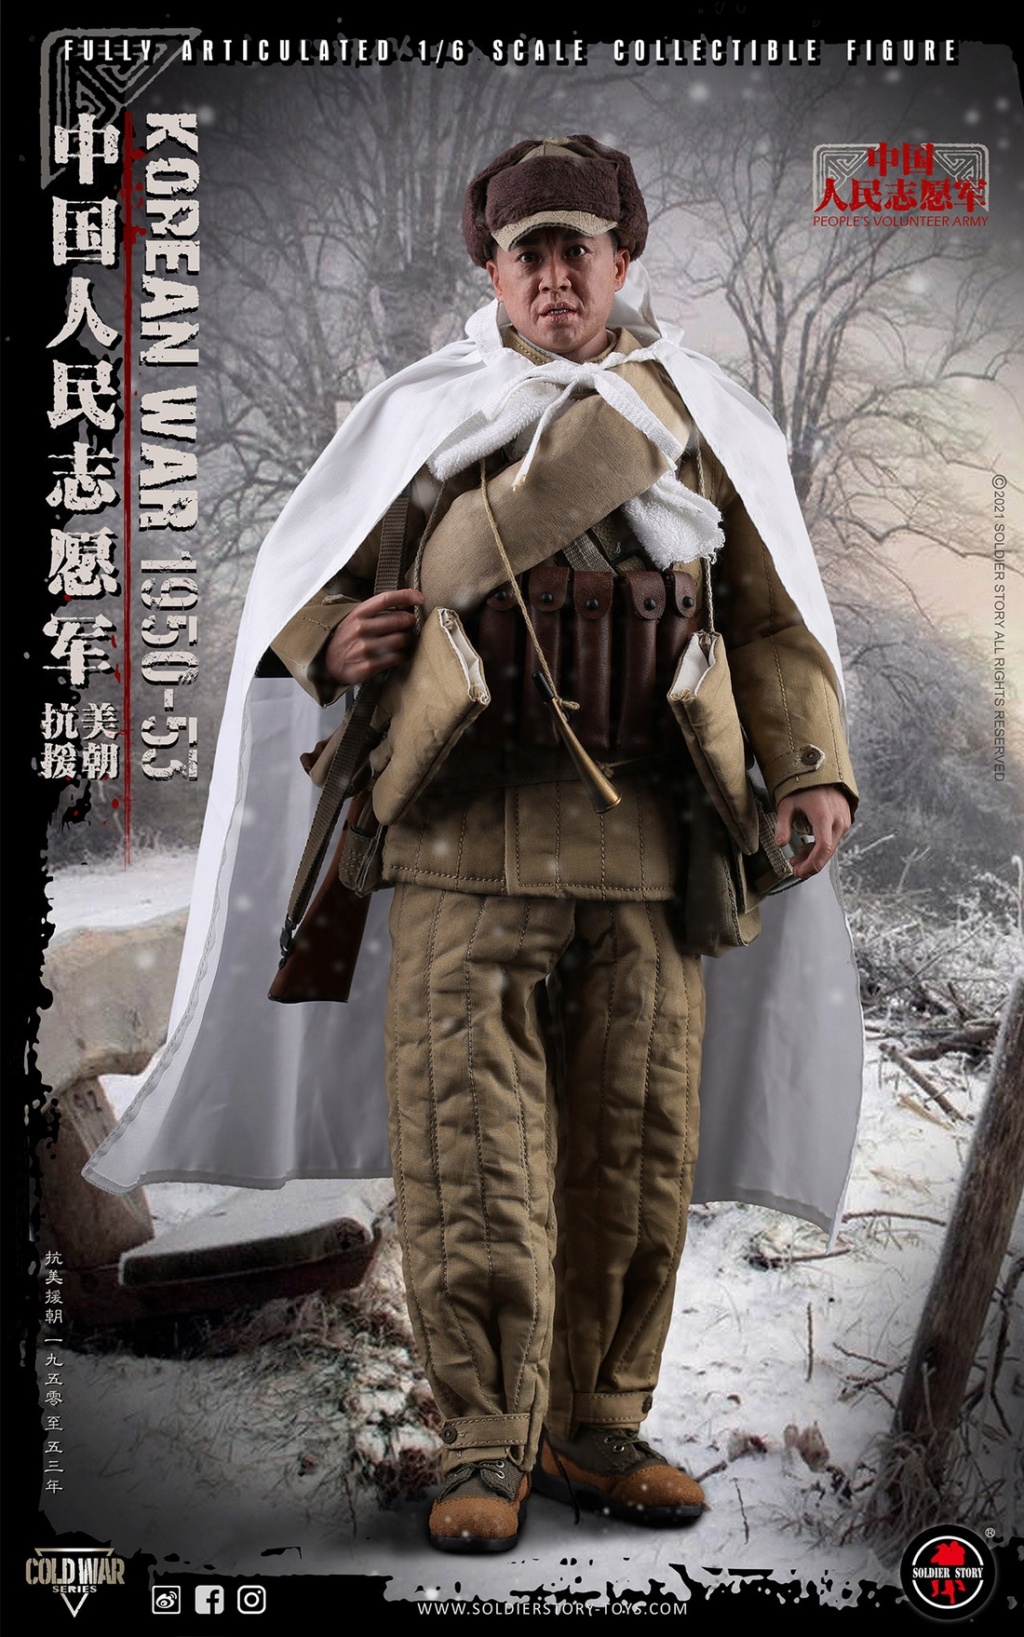 Soldierstory - NEW PRODUCT: SOLDIER STORY: 1/6 Chinese People’s Volunteers 1950-53 Collectible Action Figure (#SS-124) 4c6eaa10